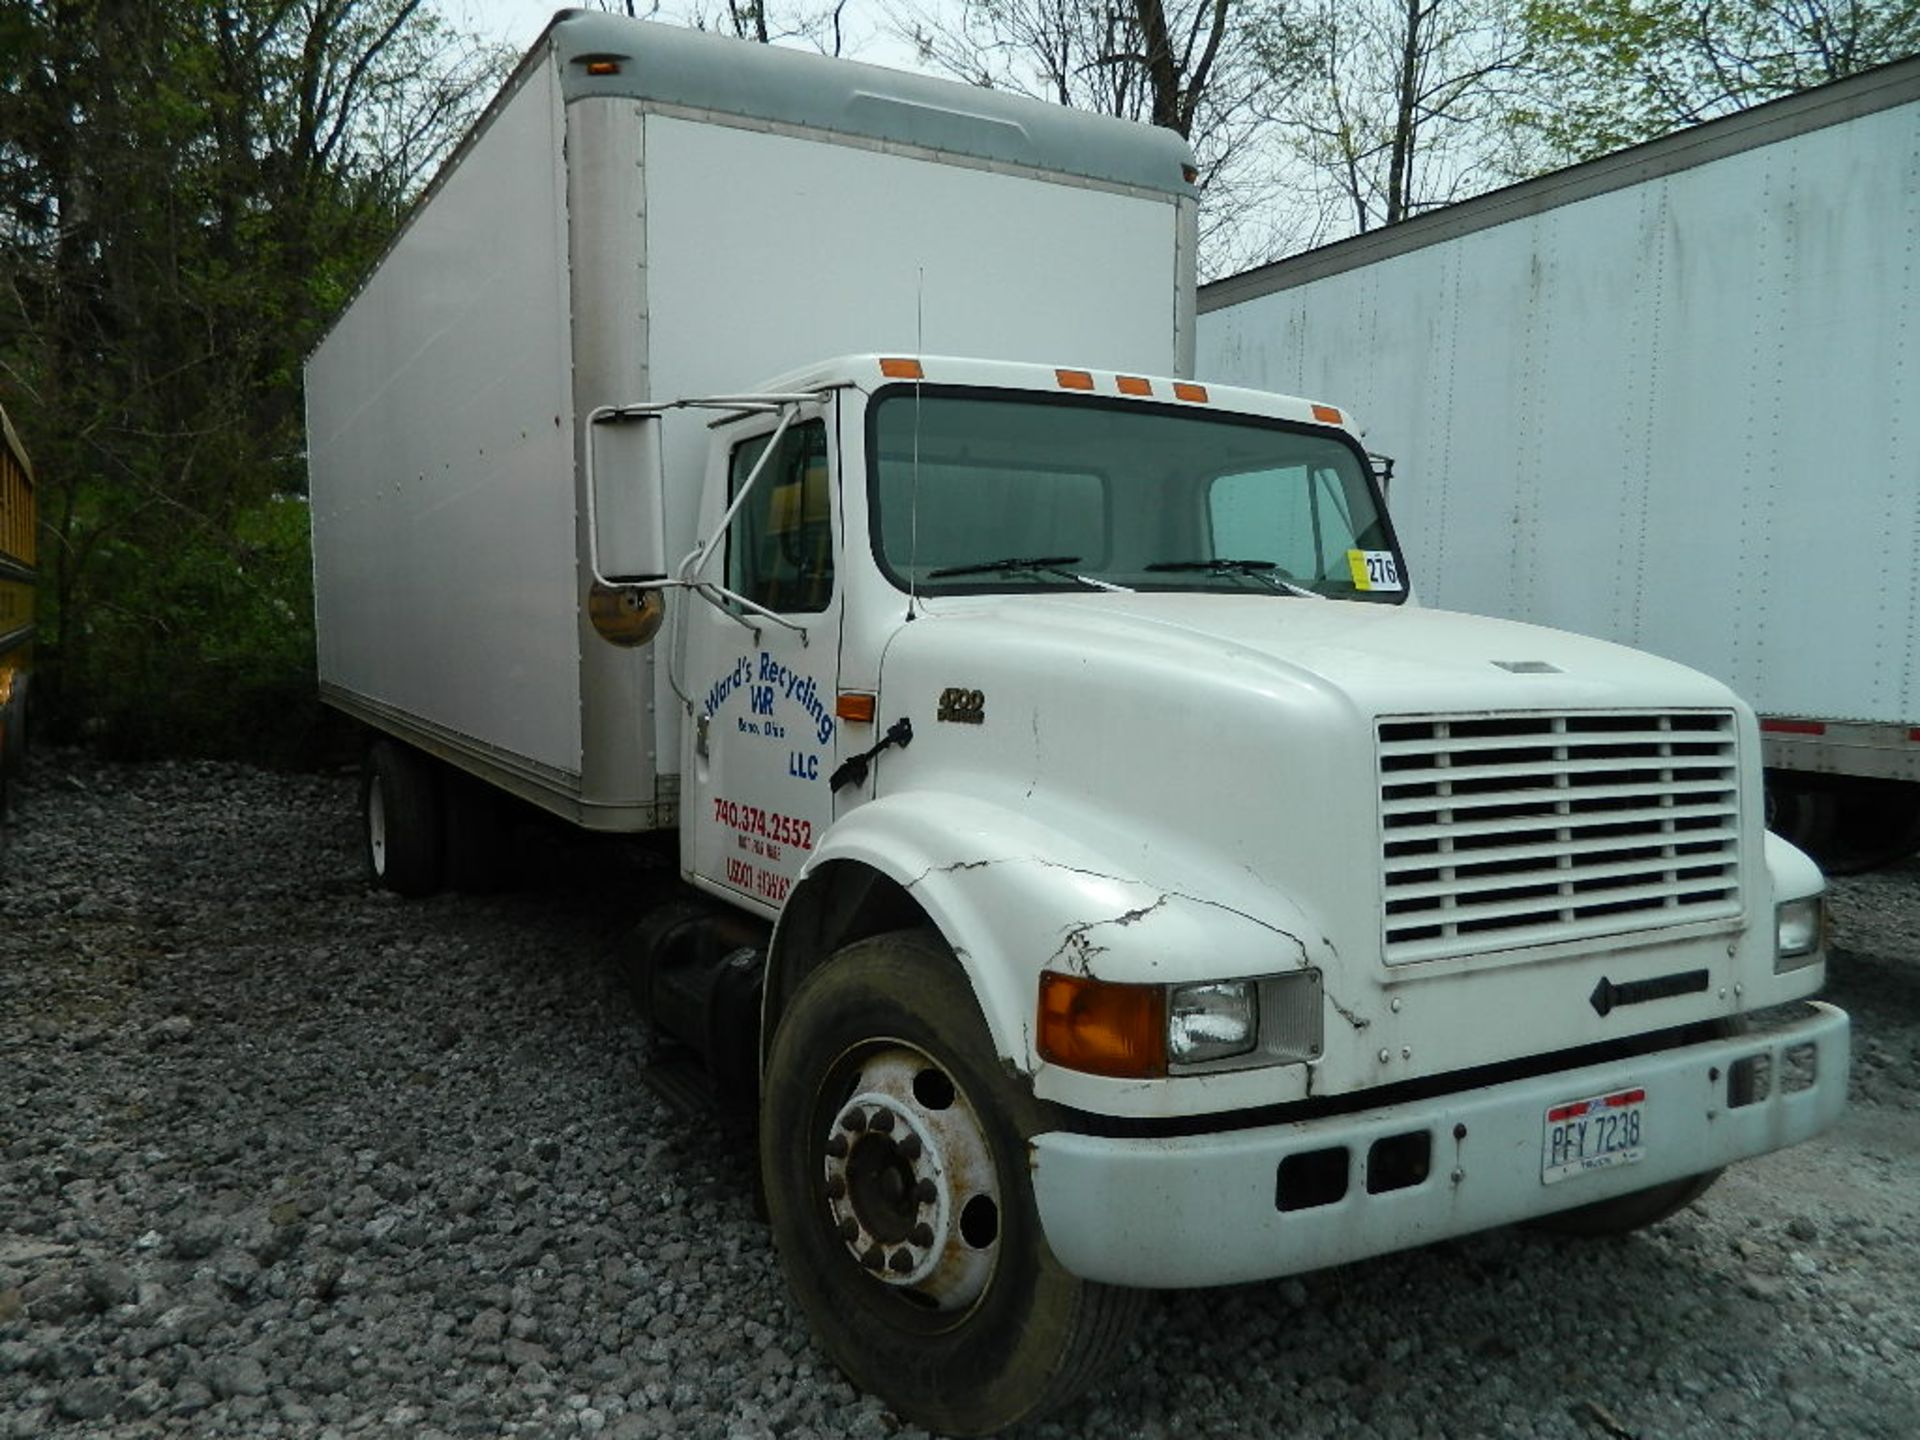 2001 INTERNATIONAL 4700 S/A BOX TRUCK, VIN# 1HTSCAAM21H382044, DT 466E DIESEL, AUTOMATIC, AIR, 24' - Image 2 of 2